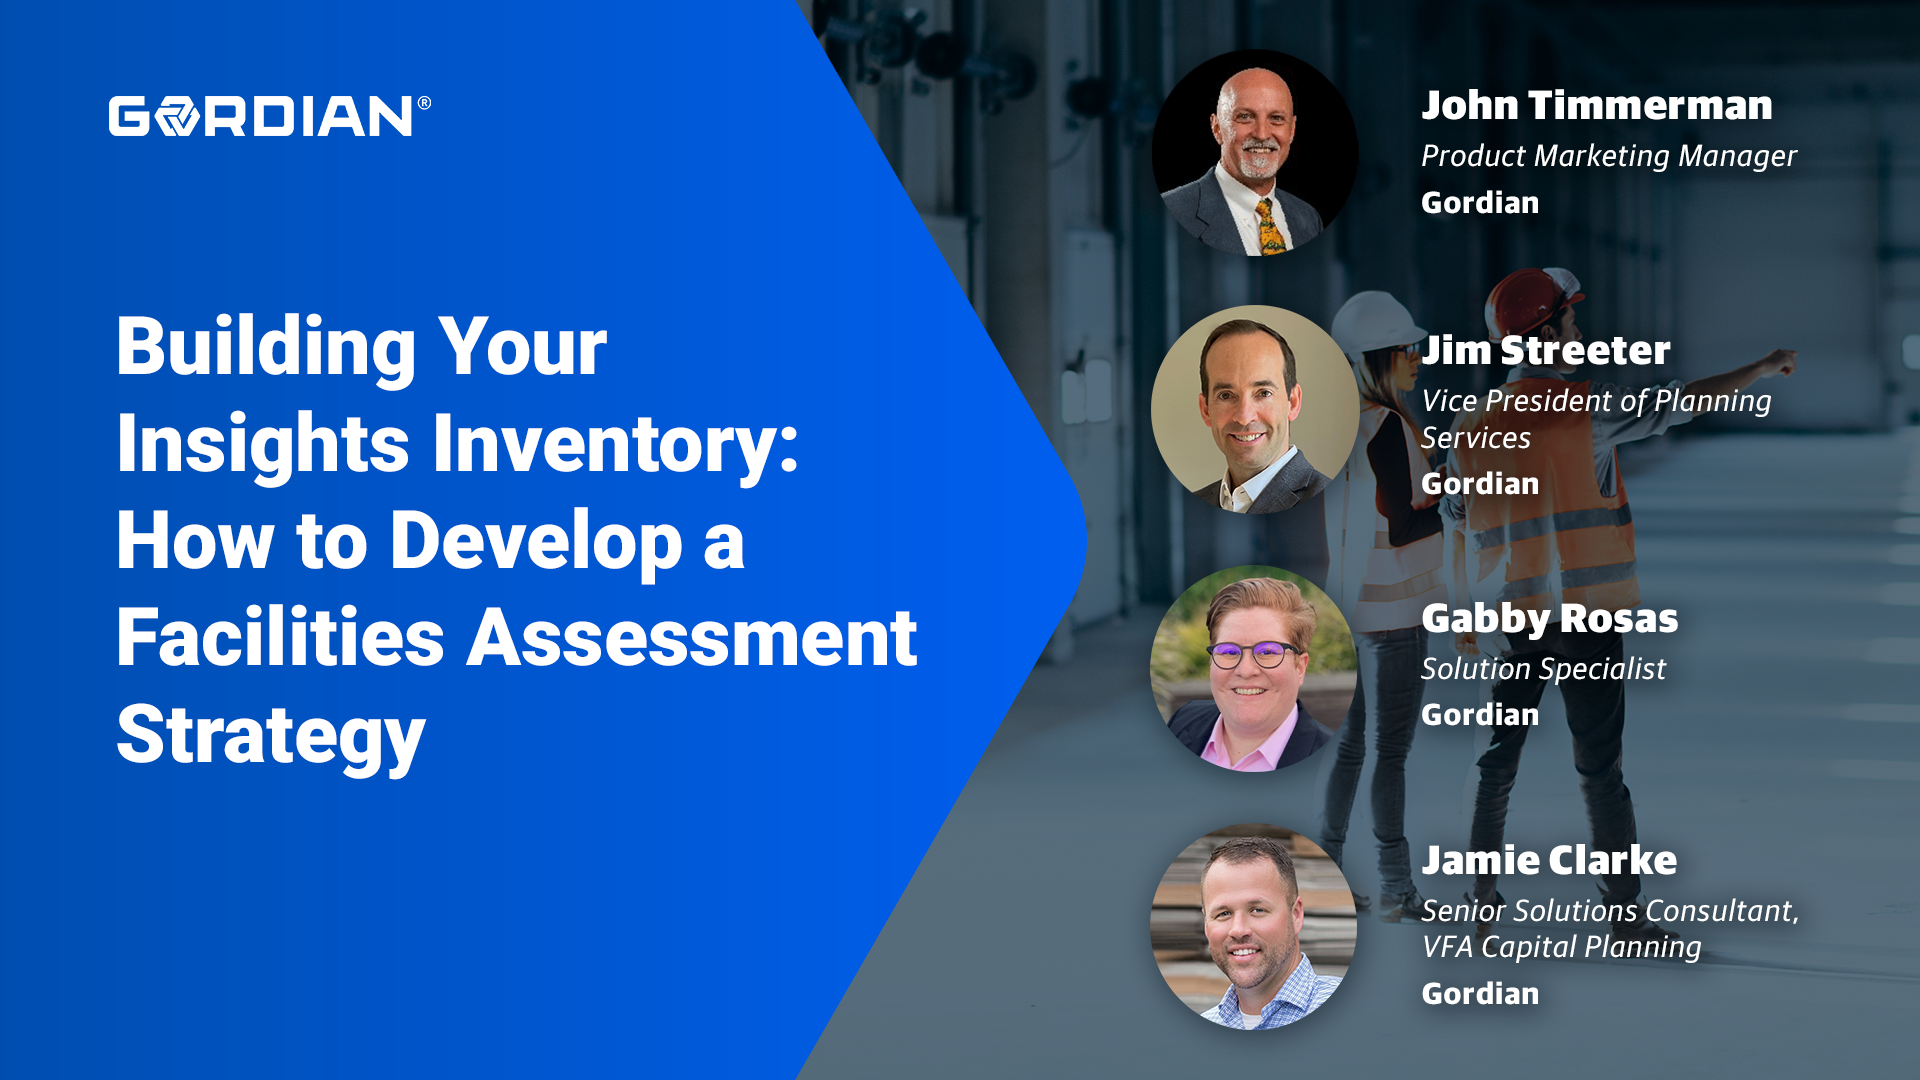 Building Your Insights Inventory: How to Develop a Facilities Assessment Strategy